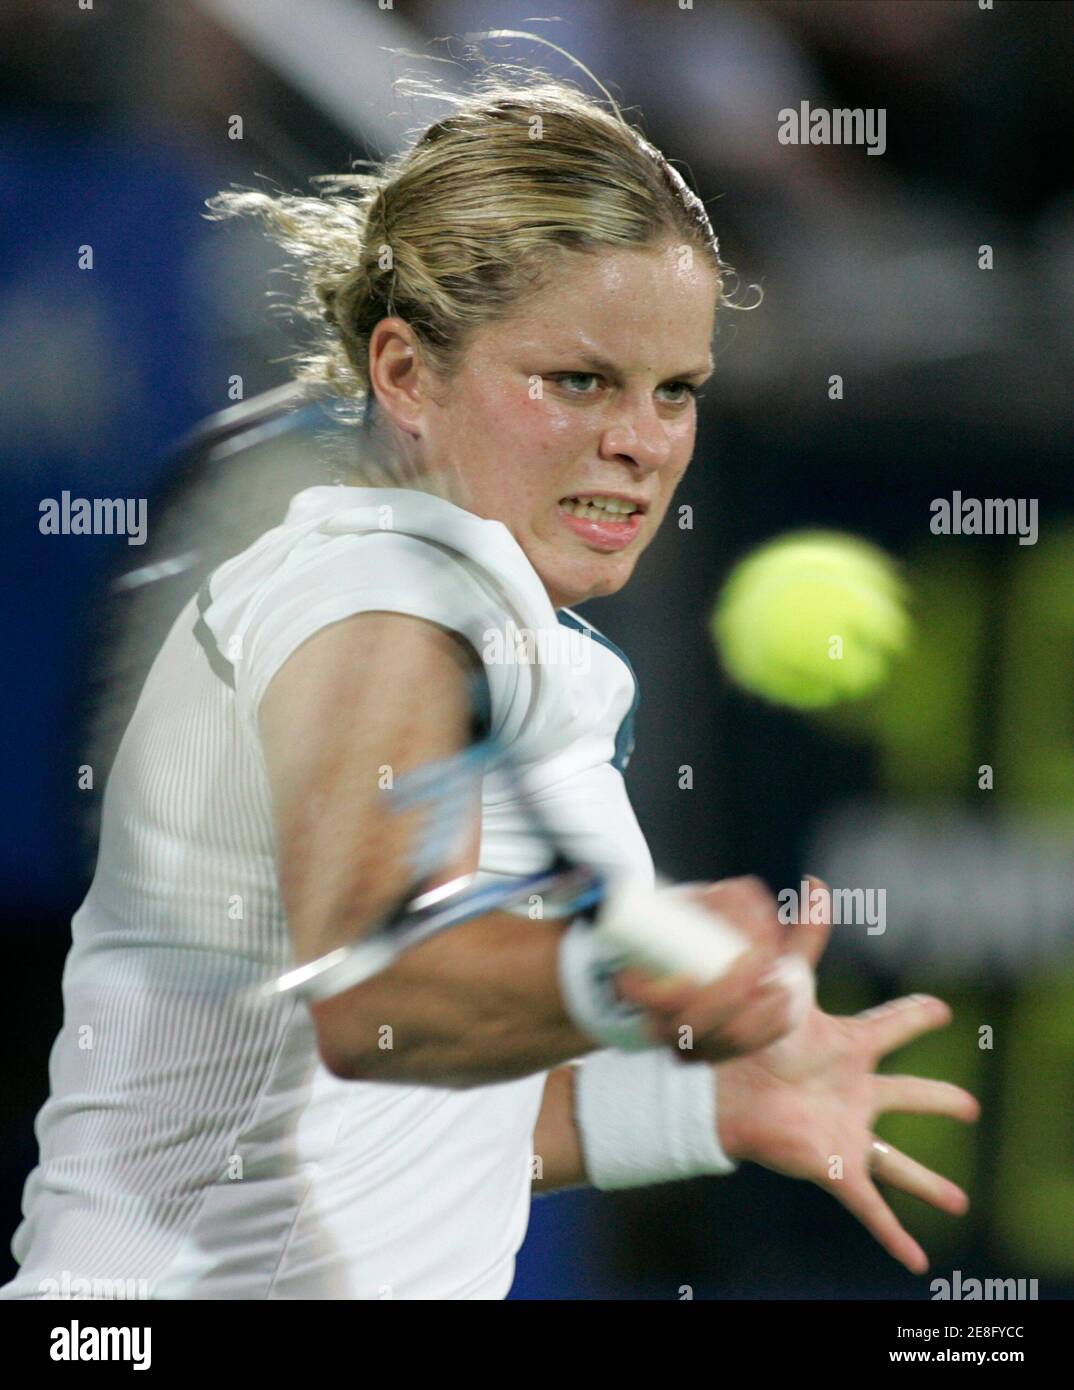 Kim Clijsters of Belgium hits a shot during her win over Jelena Jankovic of Serbia in the women's singles final of the Sydney International tennis tournament at Olympic Park in Sydney January 12, 2007. REUTERS/Will Burgess  (AUSTRALIA) Stock Photo